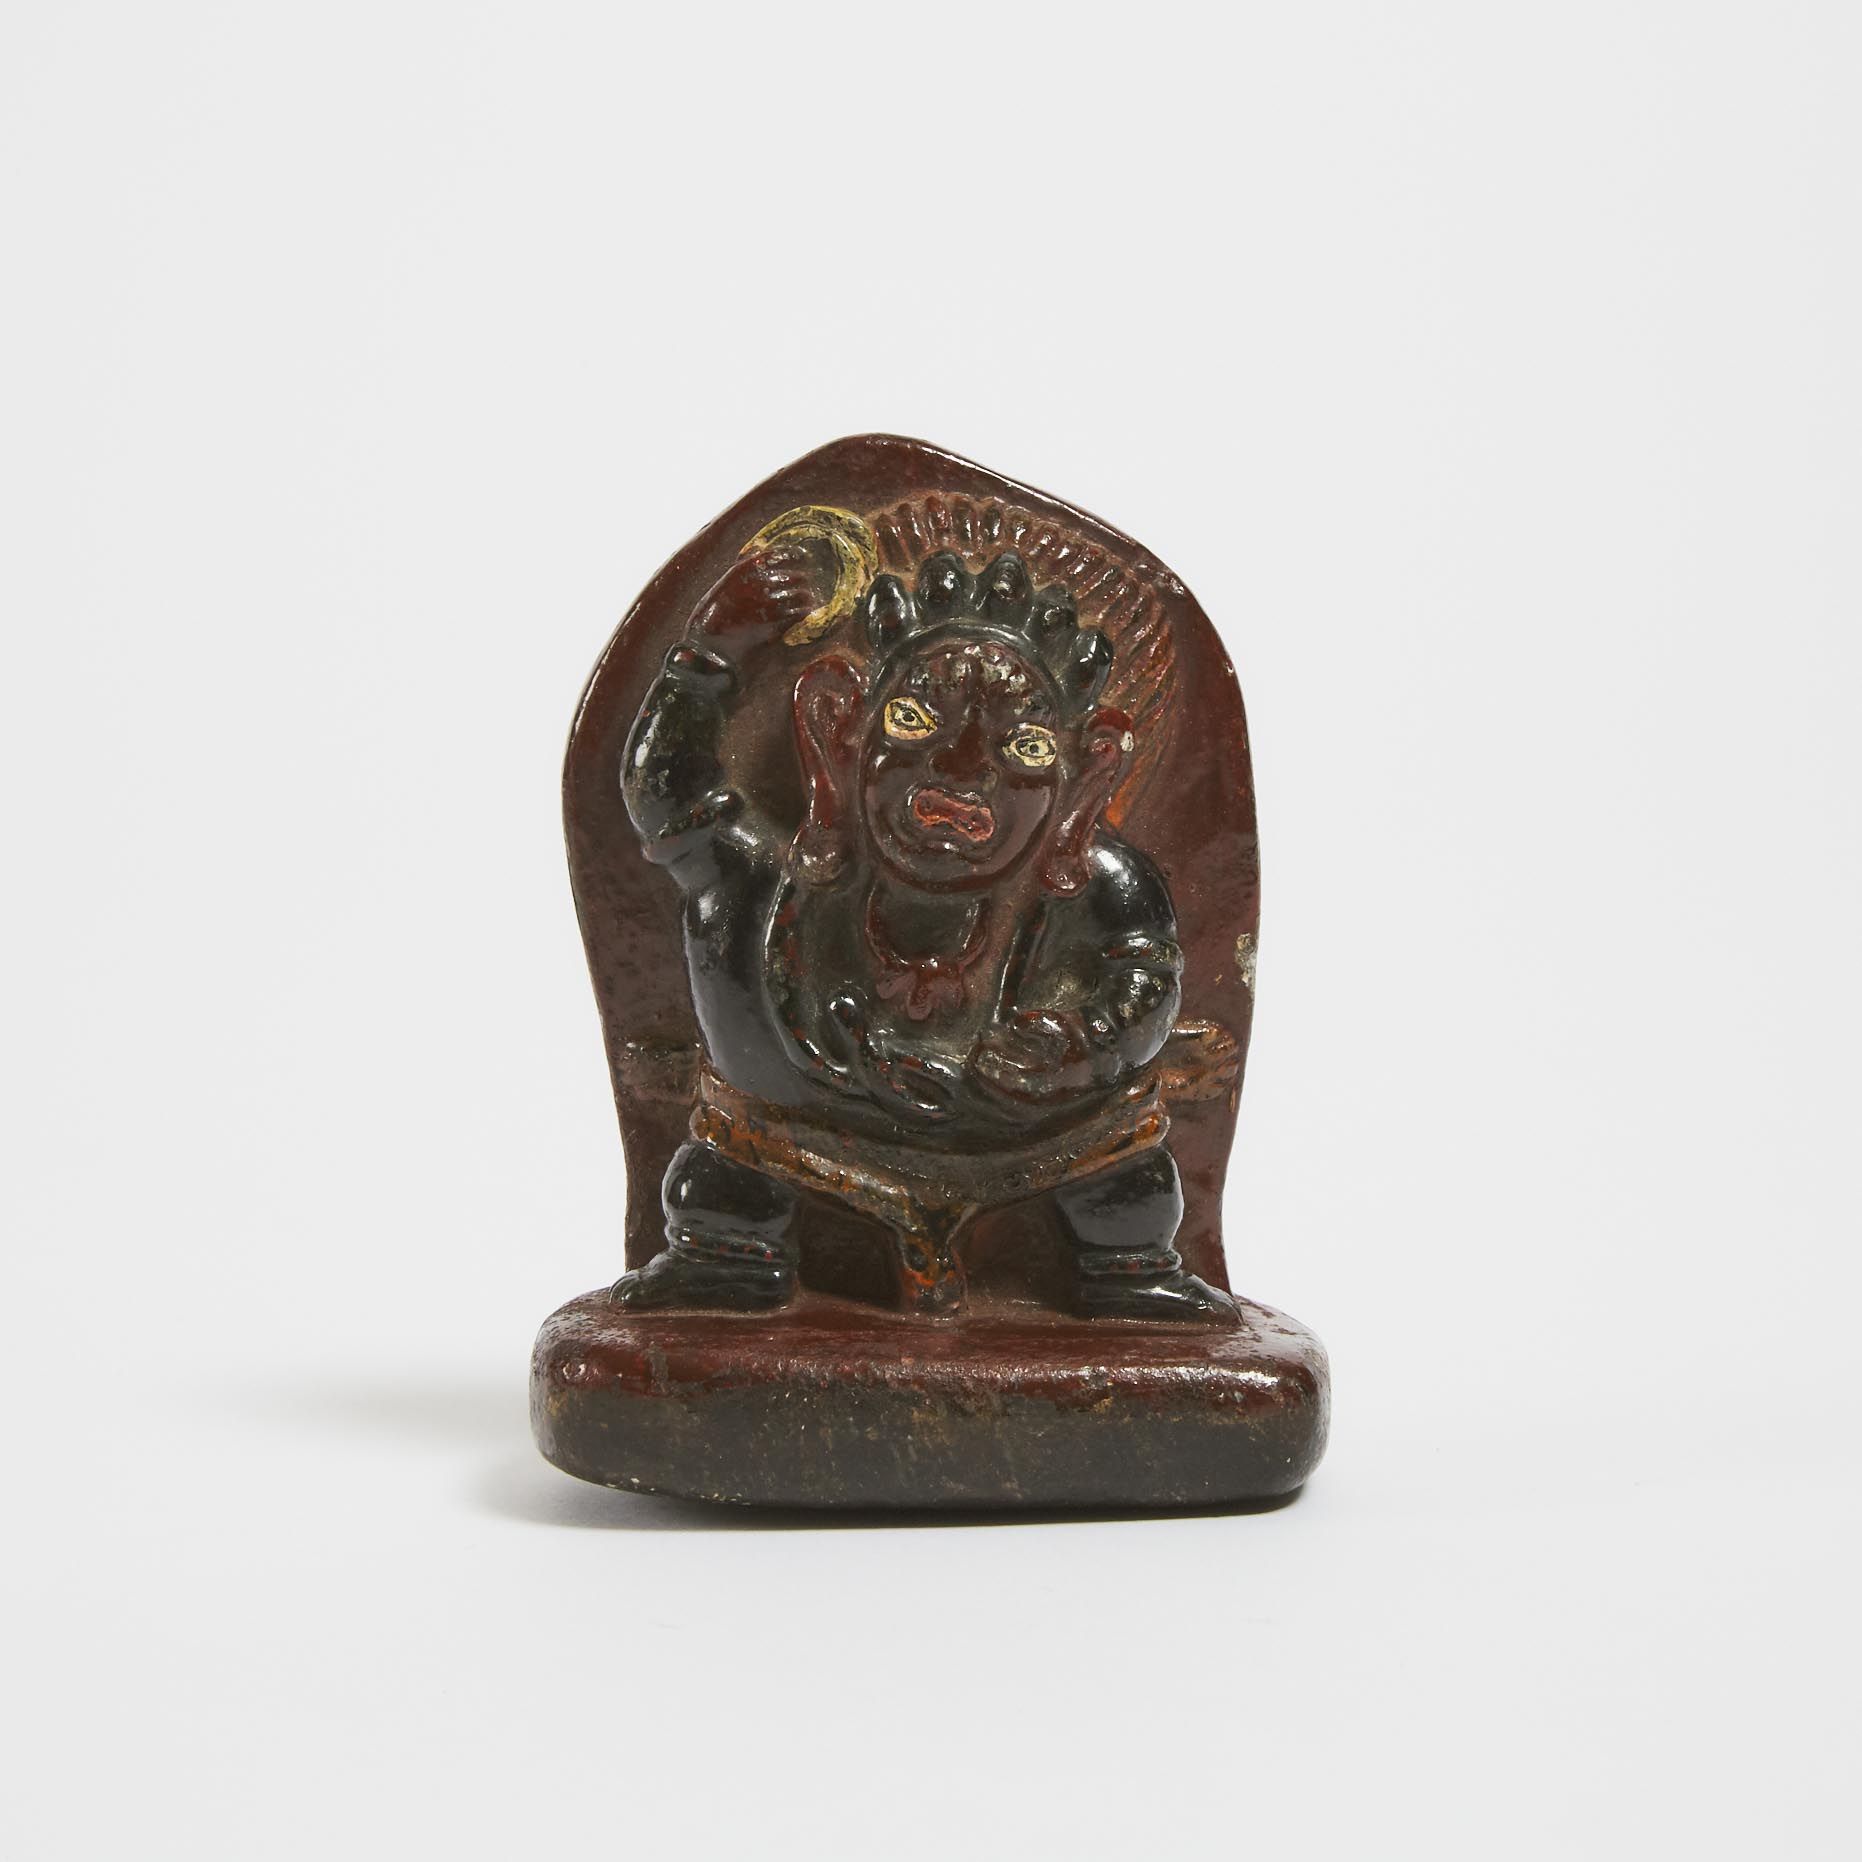 A Tibetan Polychromed and Carved Stone Figure of a Wrathful Deity, Possibly 15th Century